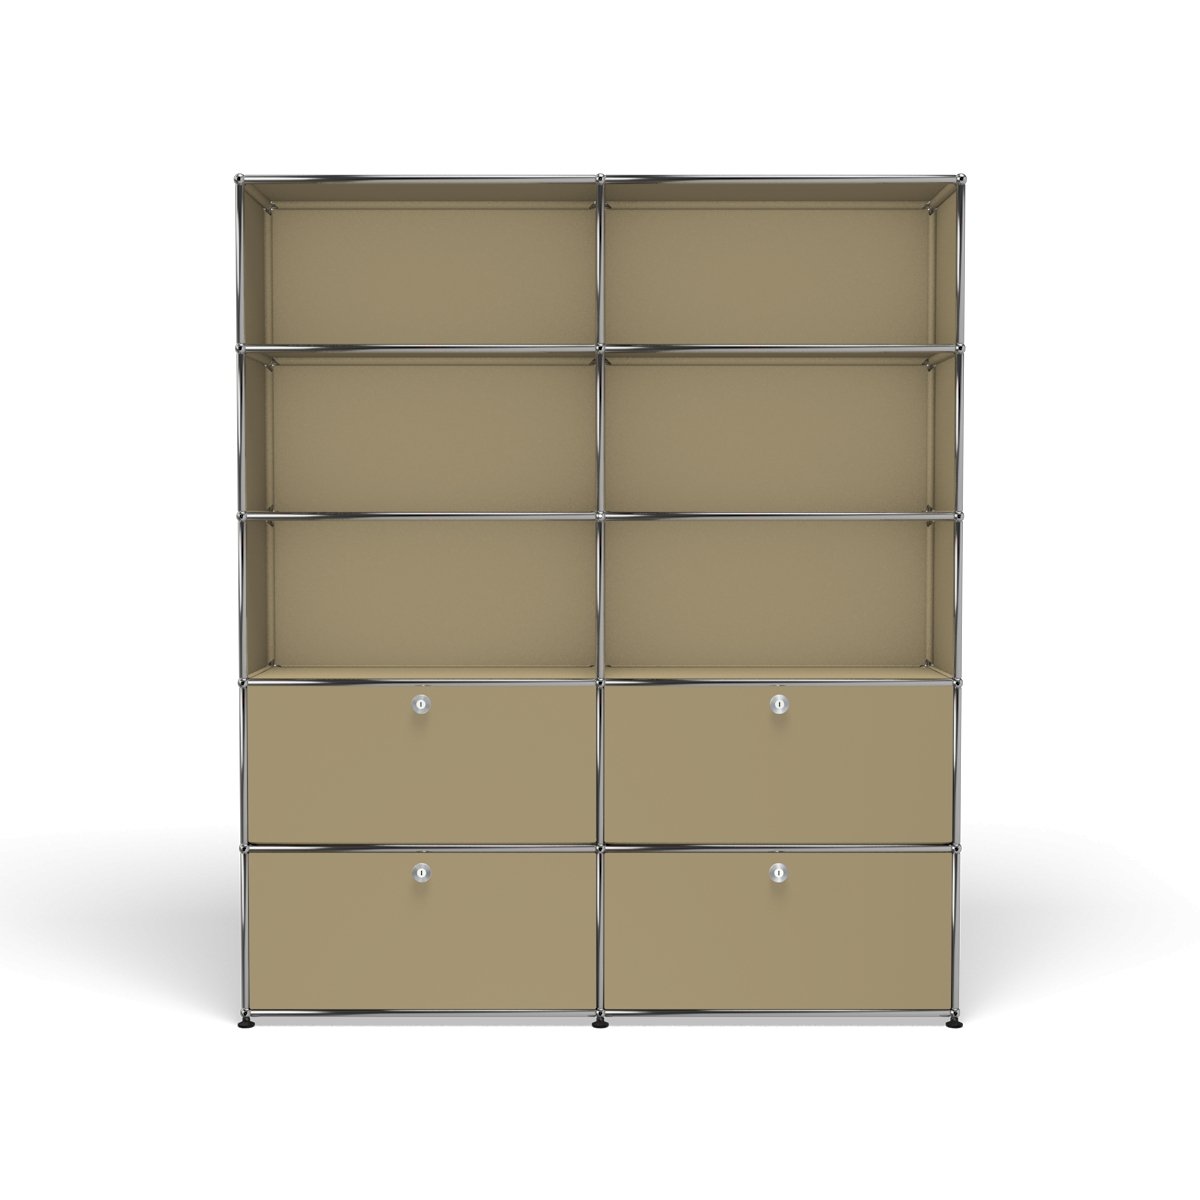 USM Haller Large Contemporary Shelving with Storage (R2) in Beige